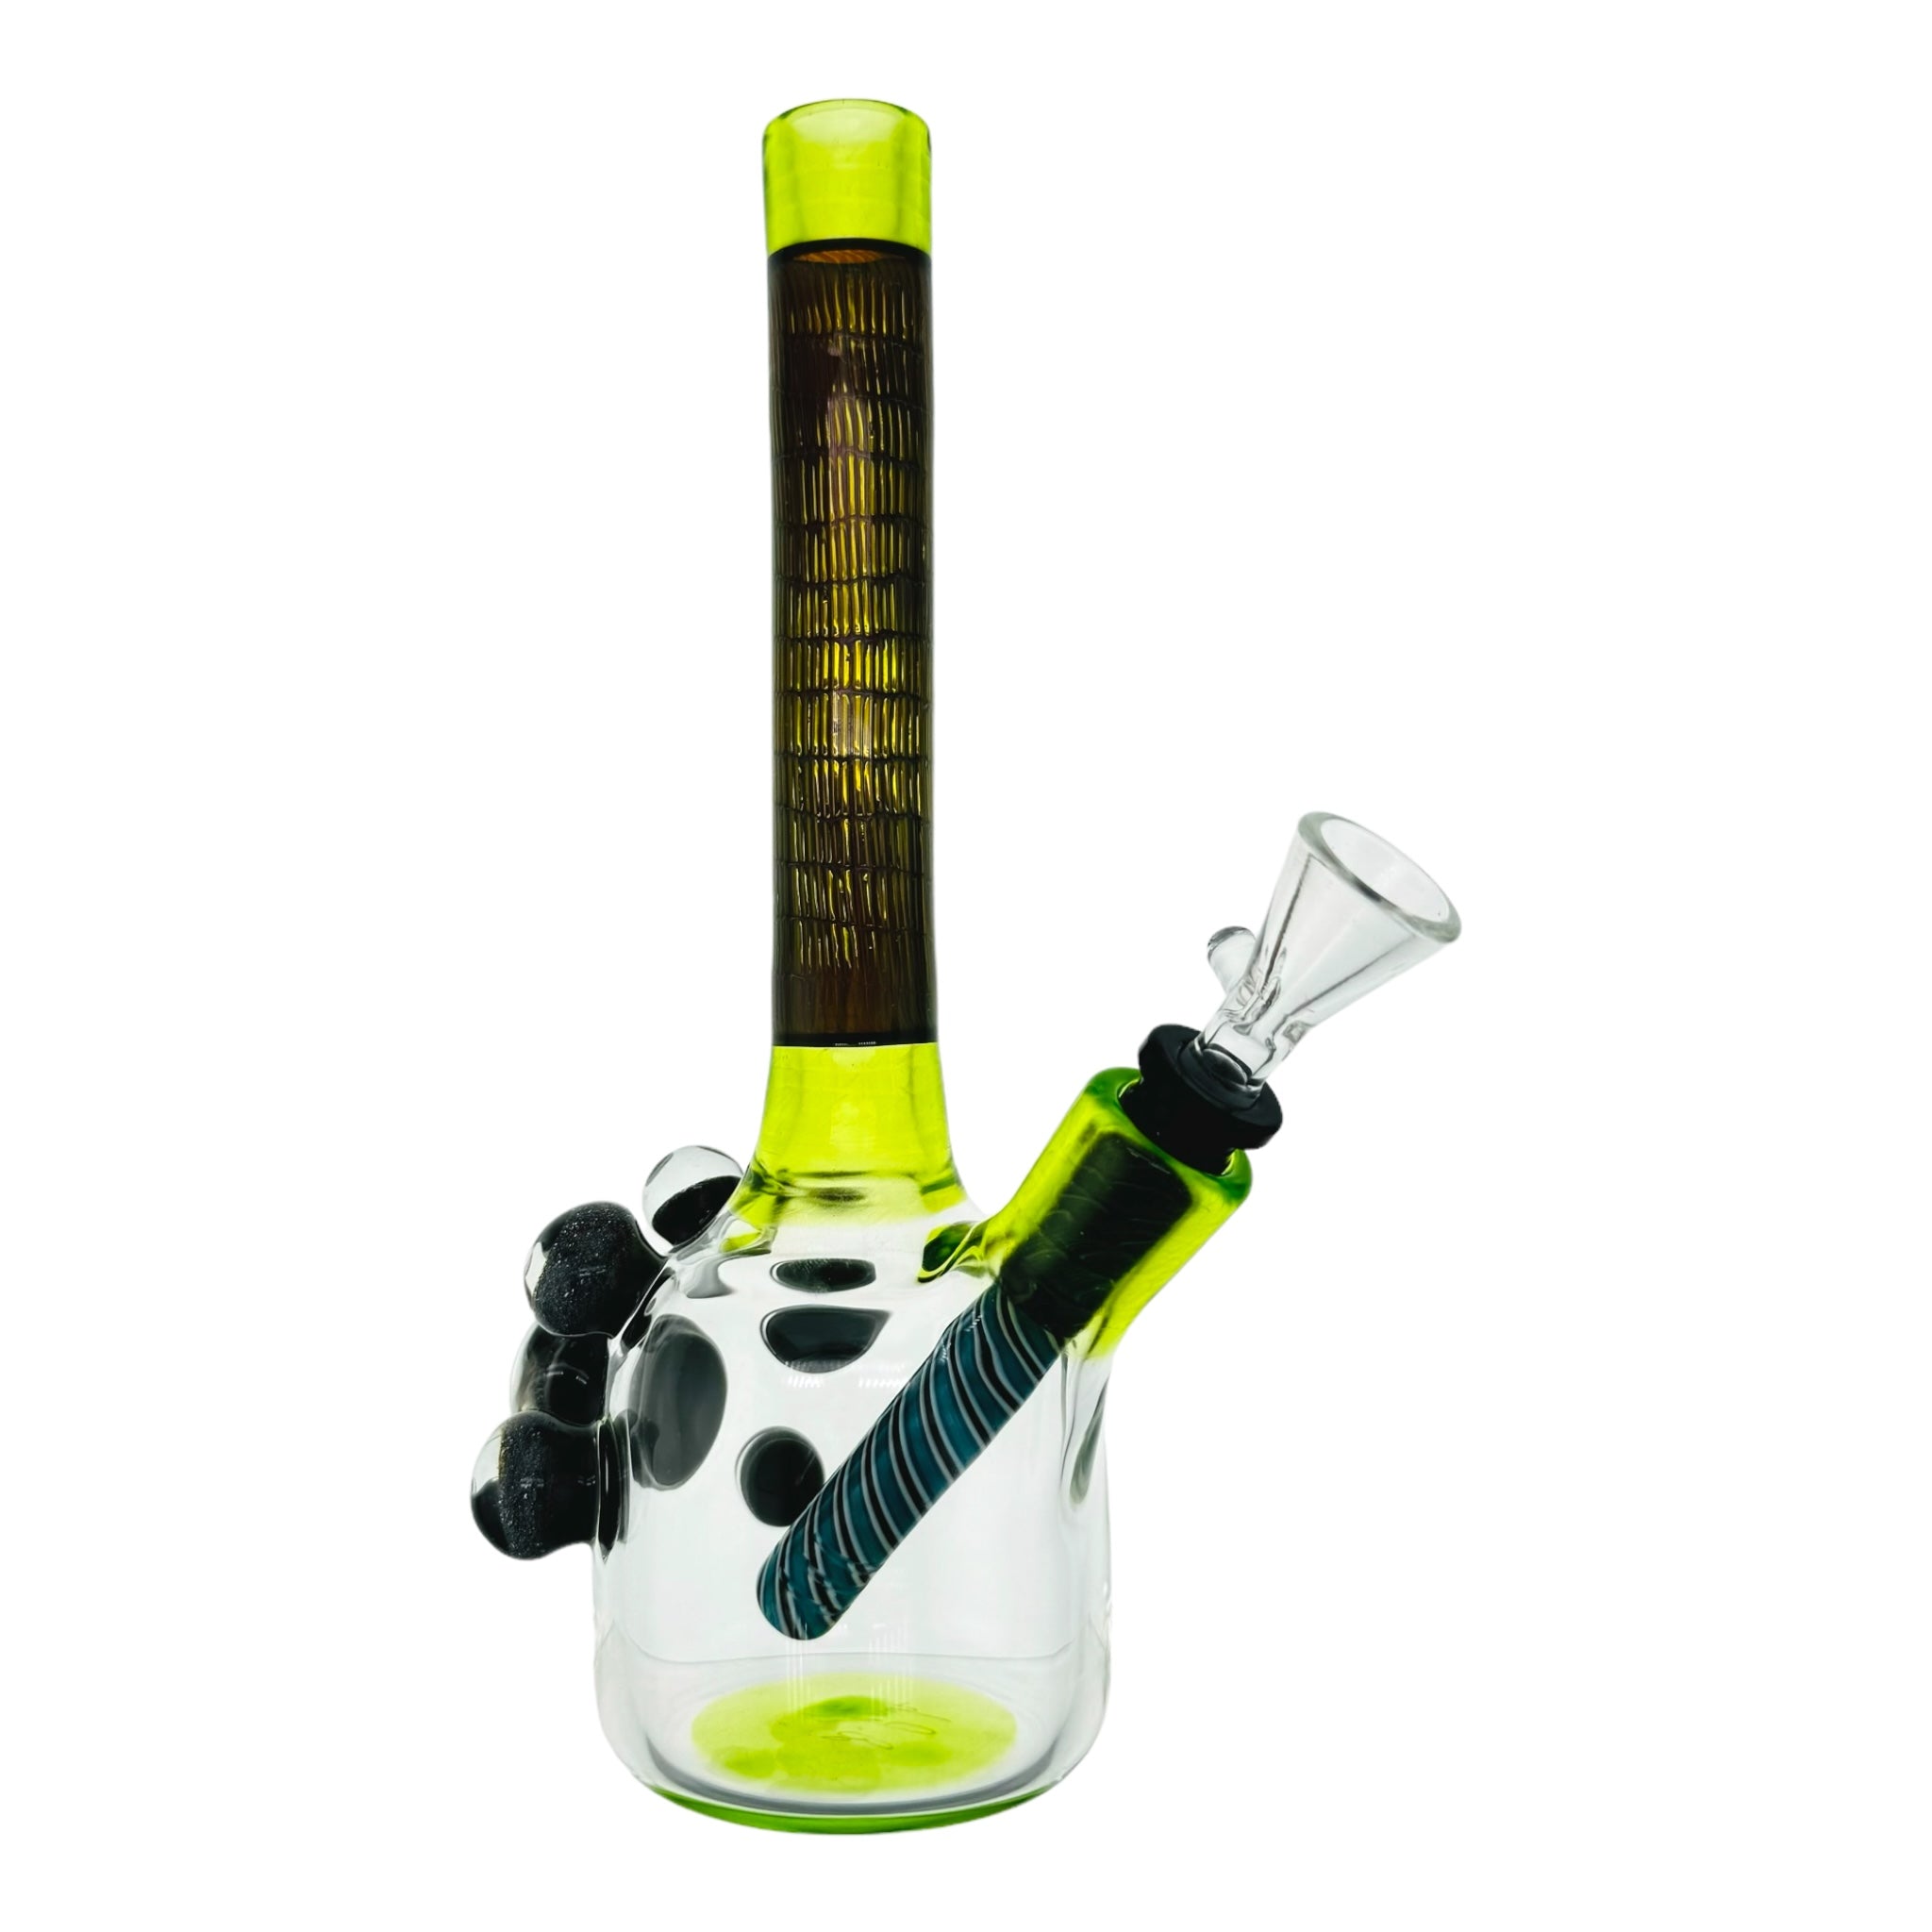 Dave Park Glass Bong And Dab Rig Sublime Green Mini Tube With Bamboo Air Trap Neck